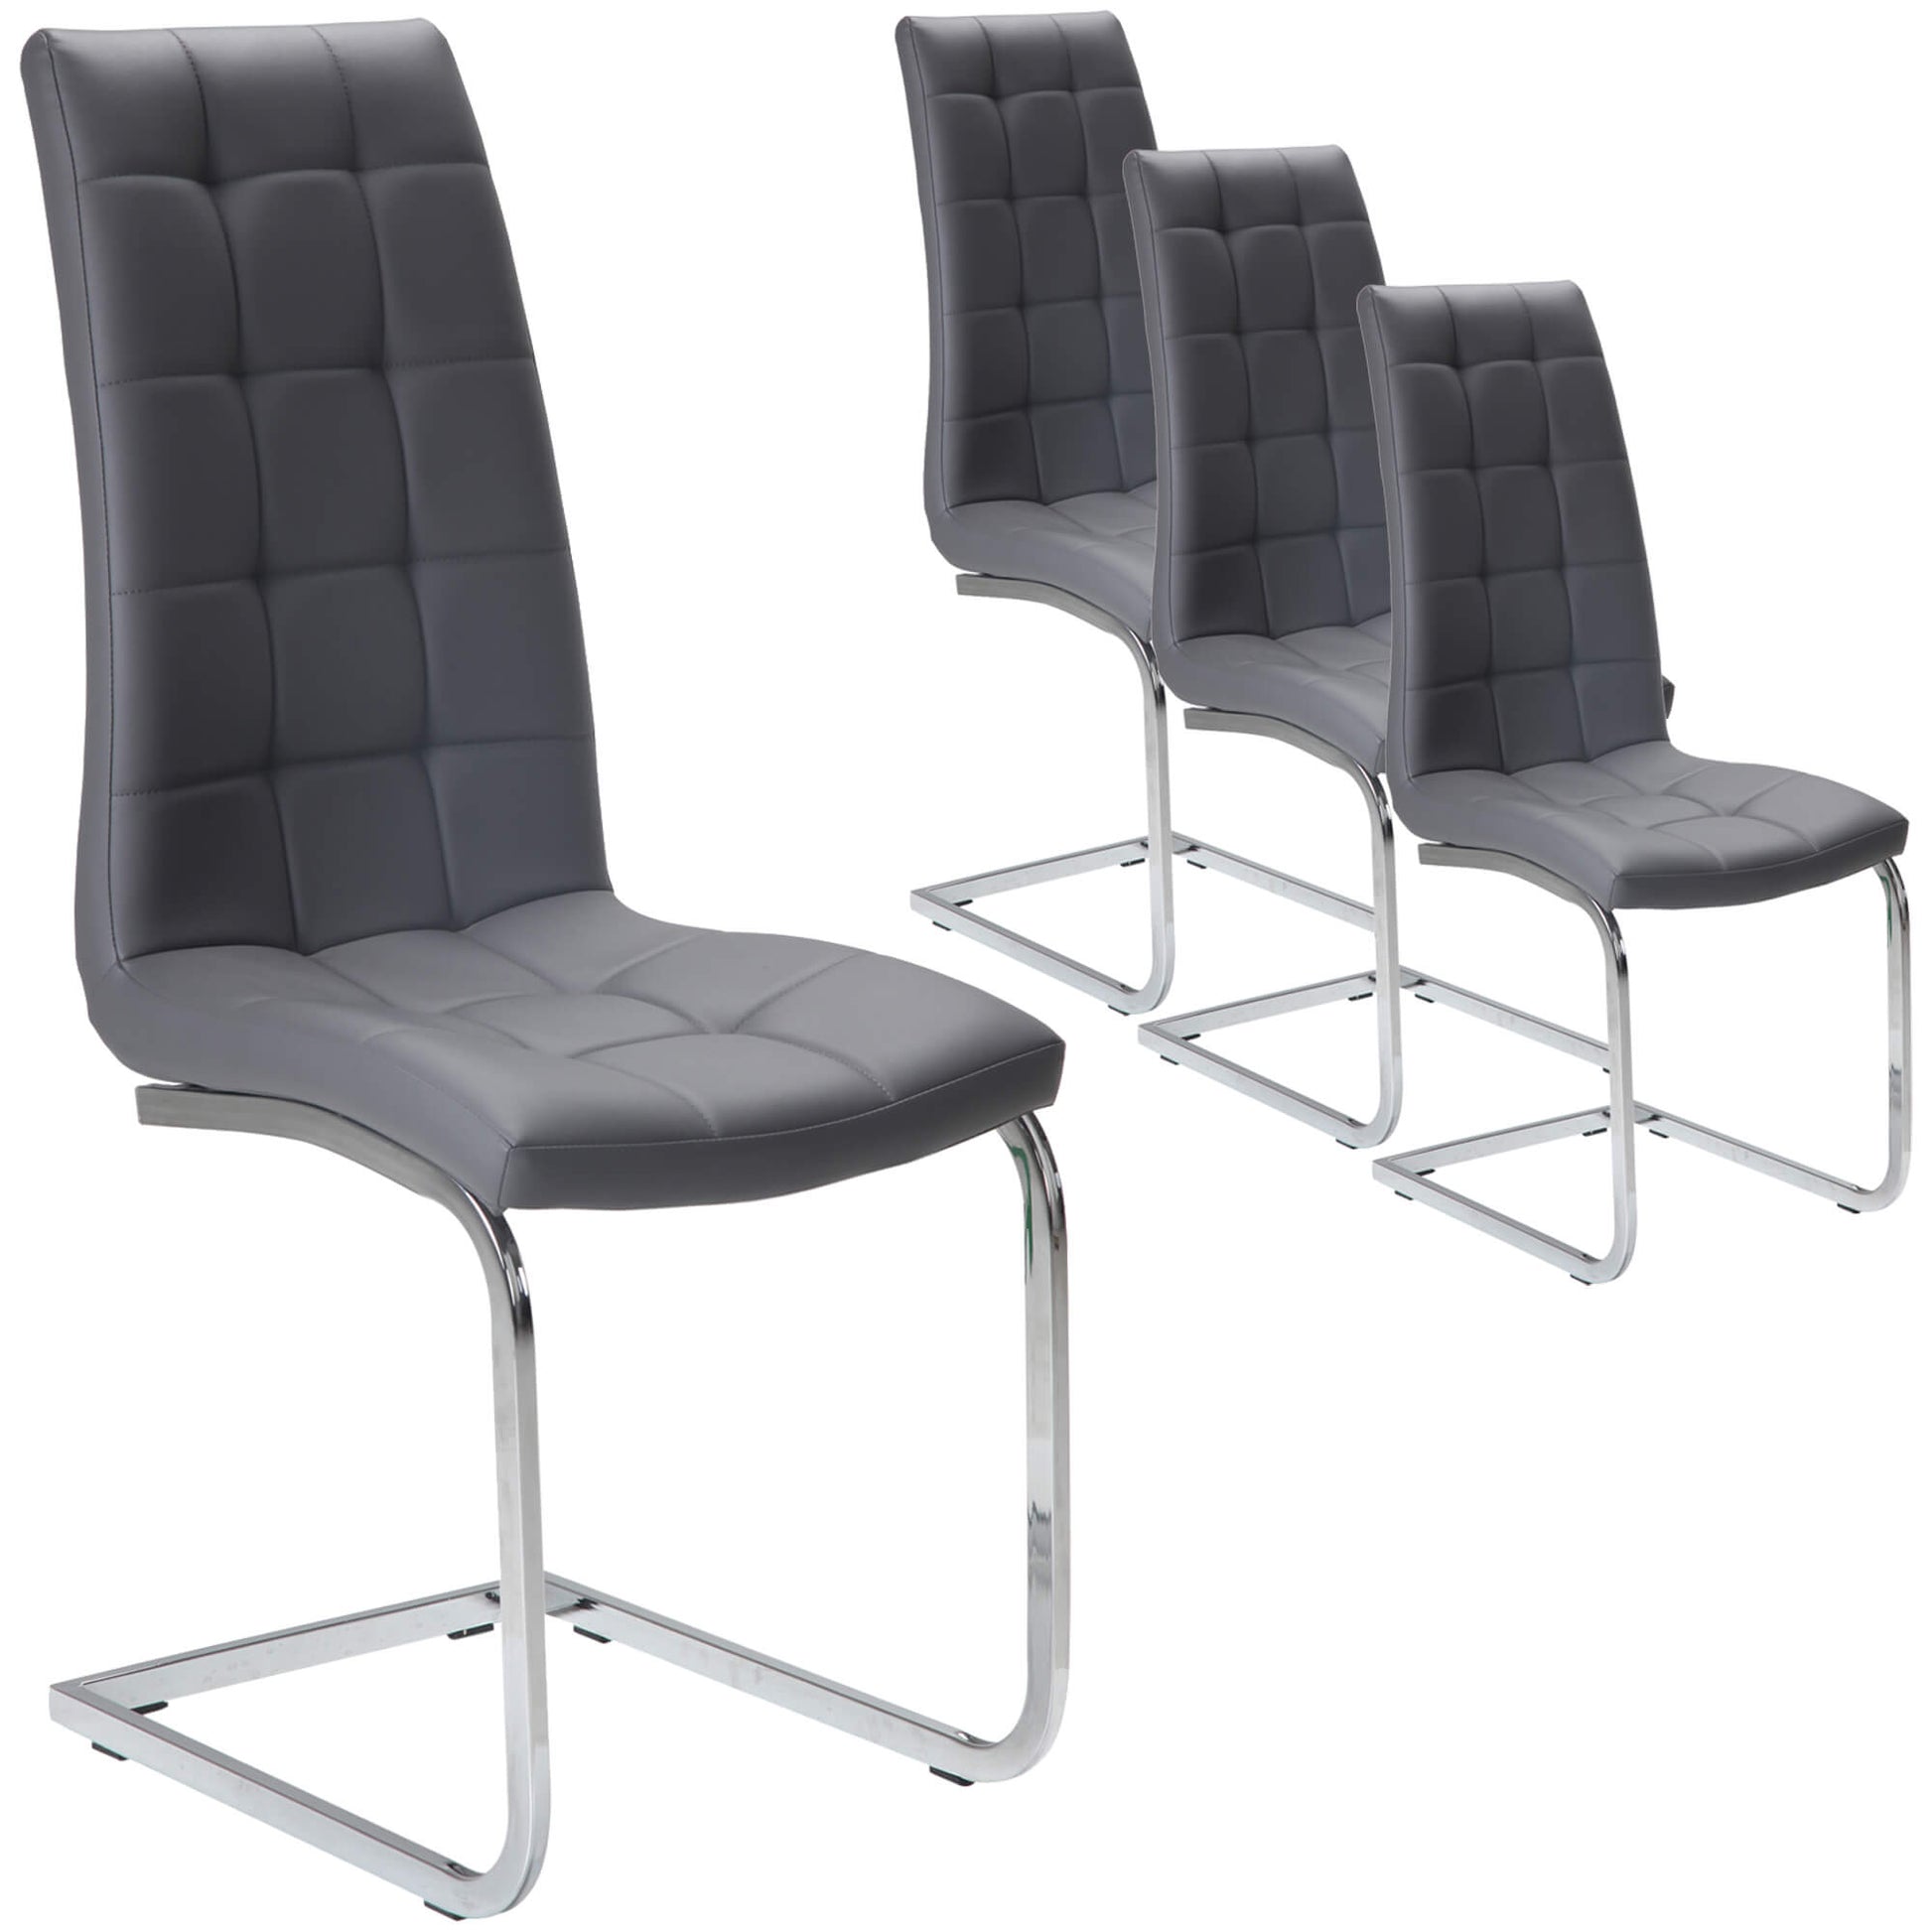 Belair | Modern, Metal PU Leather Dining Chairs | Set Of 4 | Grey